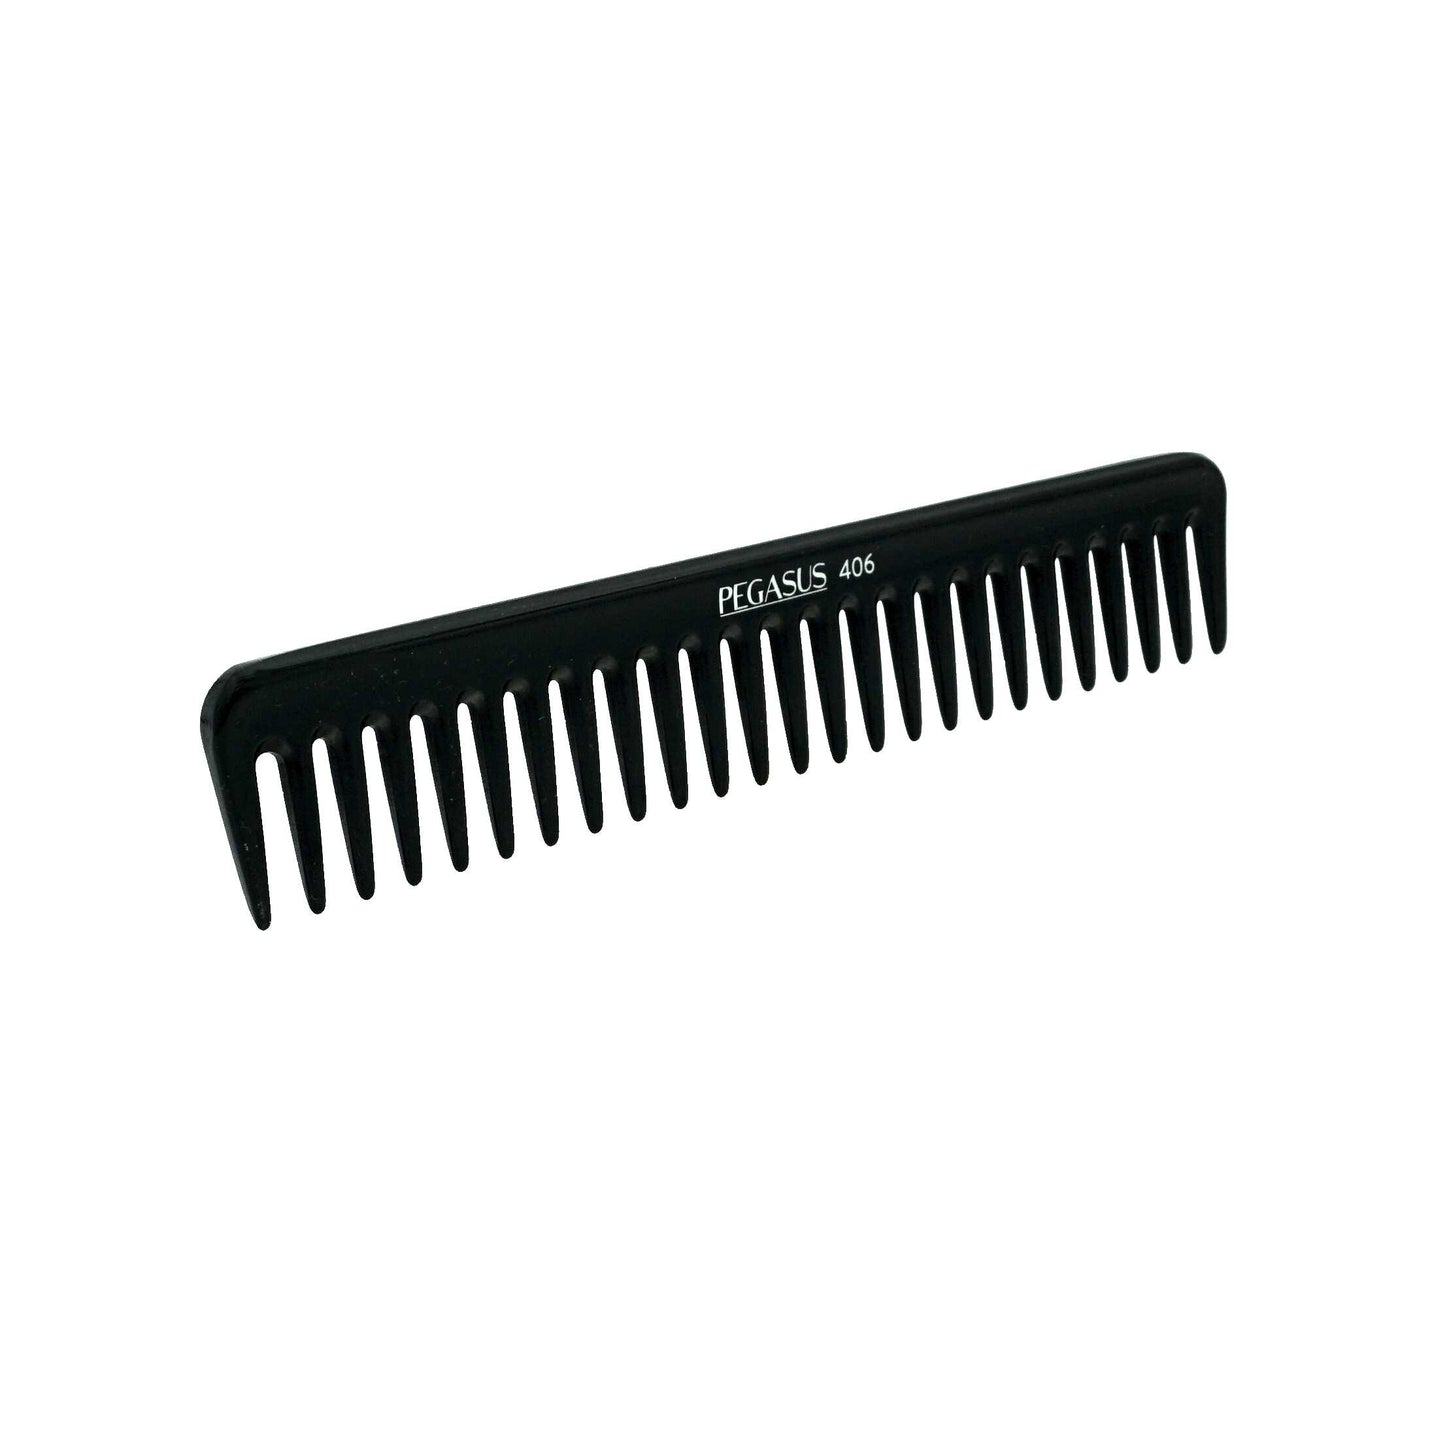 Pegasus 406, 7in Hard Rubber Wide Tooth Styling Comb, Handmade, Seamless, Smooth Edges, Anti Static, Heat and Chemically Resistant, Wet Hair, Everyday Grooming Comb | Peines de goma dura - Black